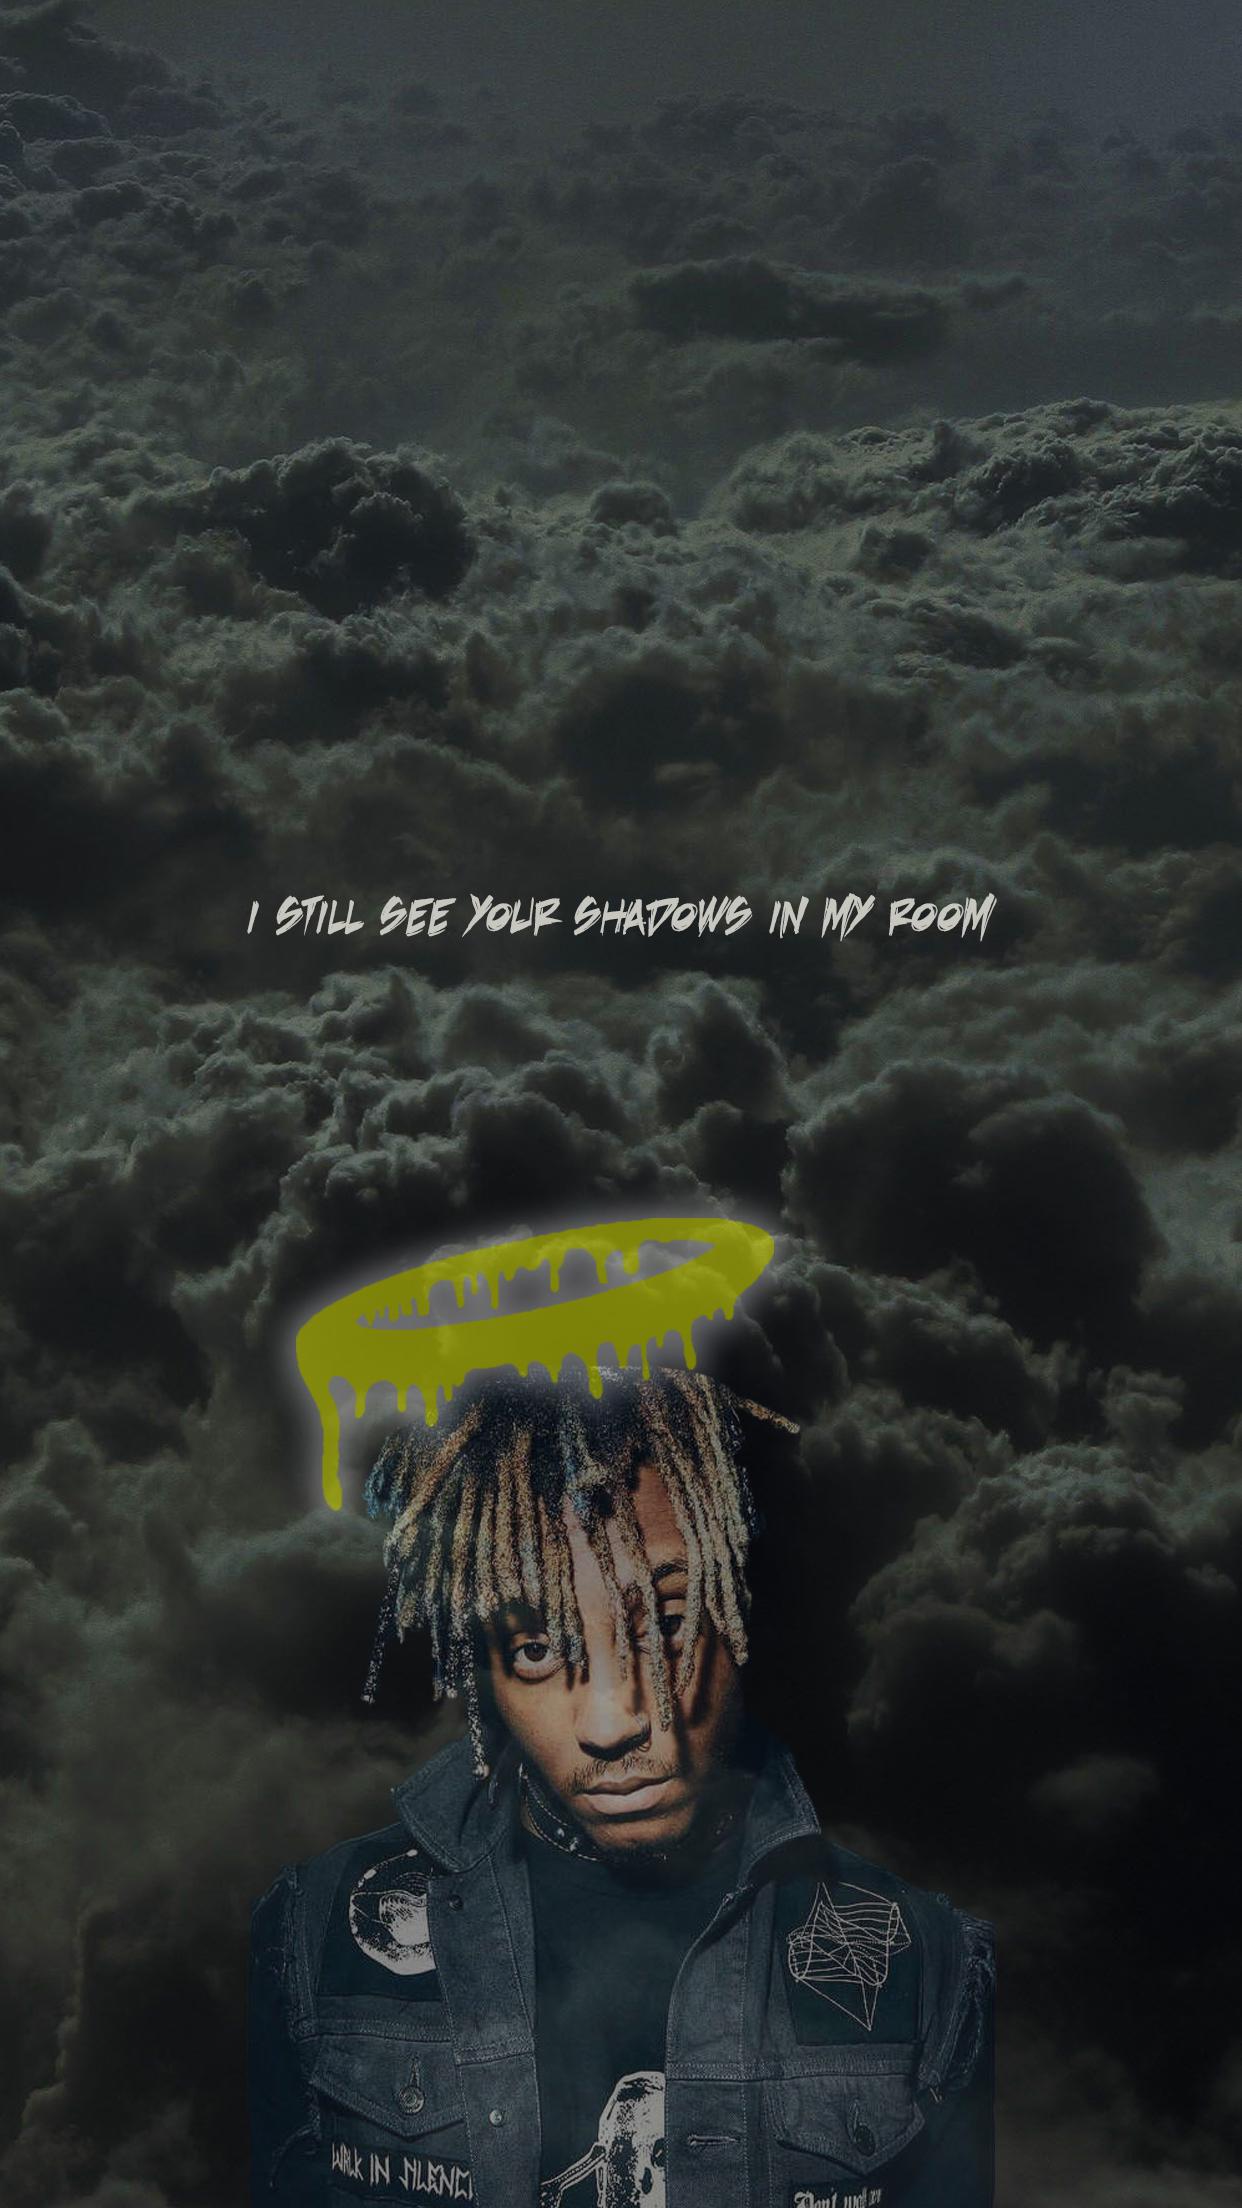 Juice Wrld Quotes Wallpapers